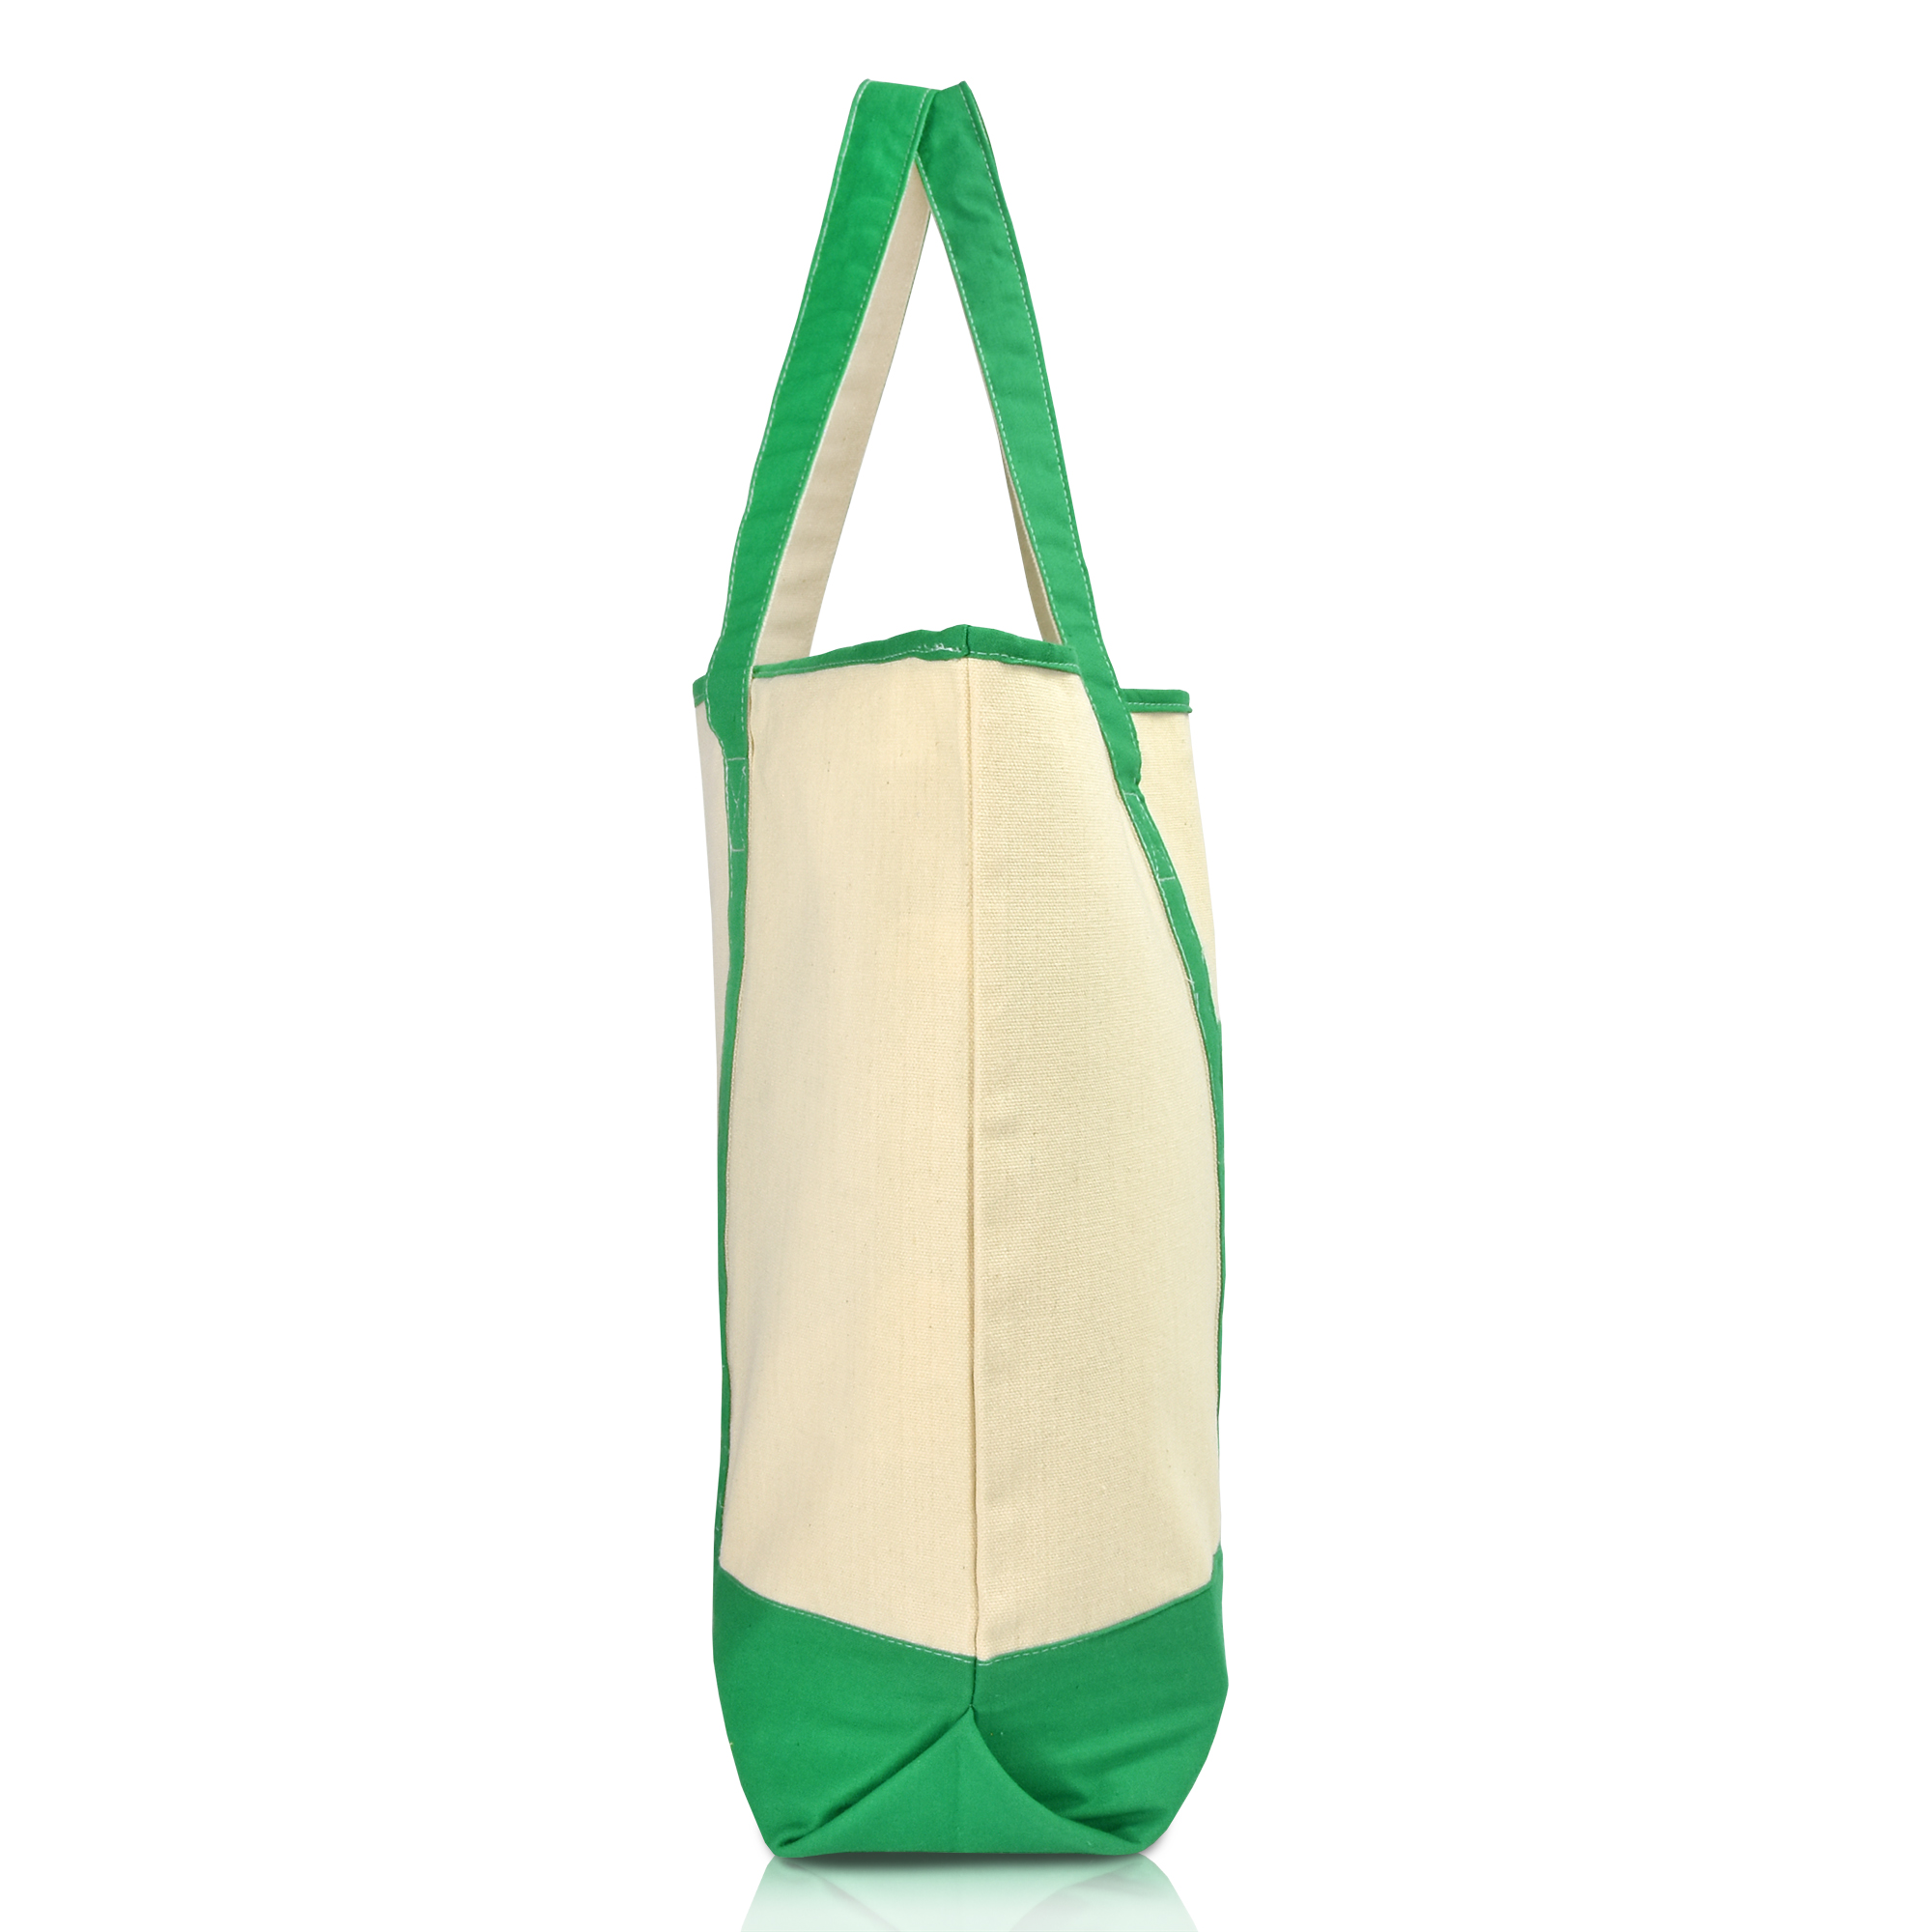 DALIX 22" Open Top Deluxe Tote Bag with Outer Pocket in Dark Green - image 2 of 5